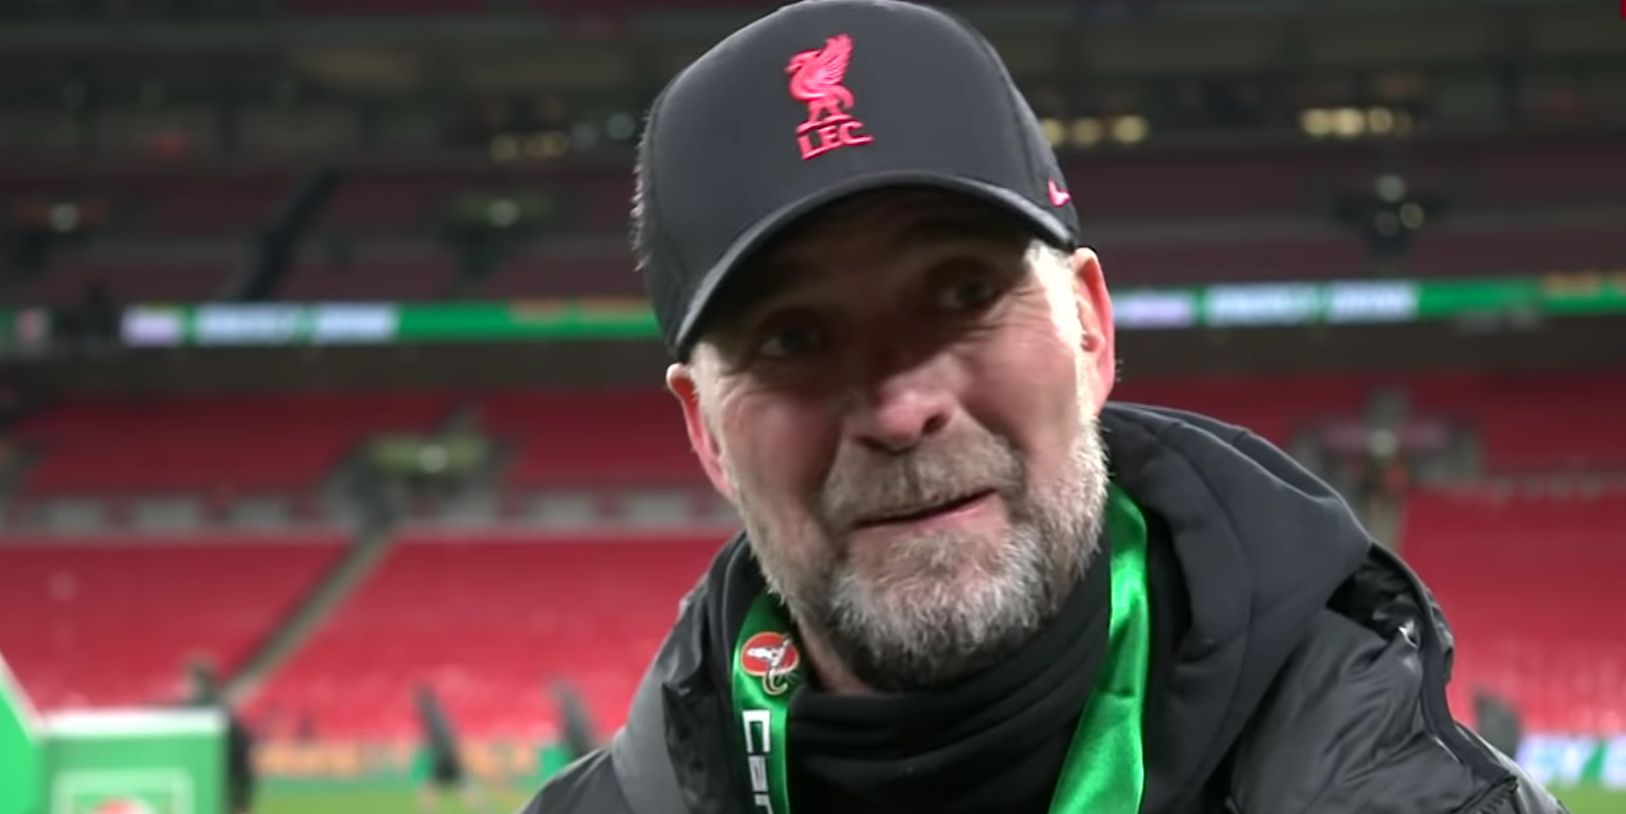 “Compliments to neuro11” – Jurgen Klopp thanks neuroscience team that helped Liverpool win the Carabao Cup